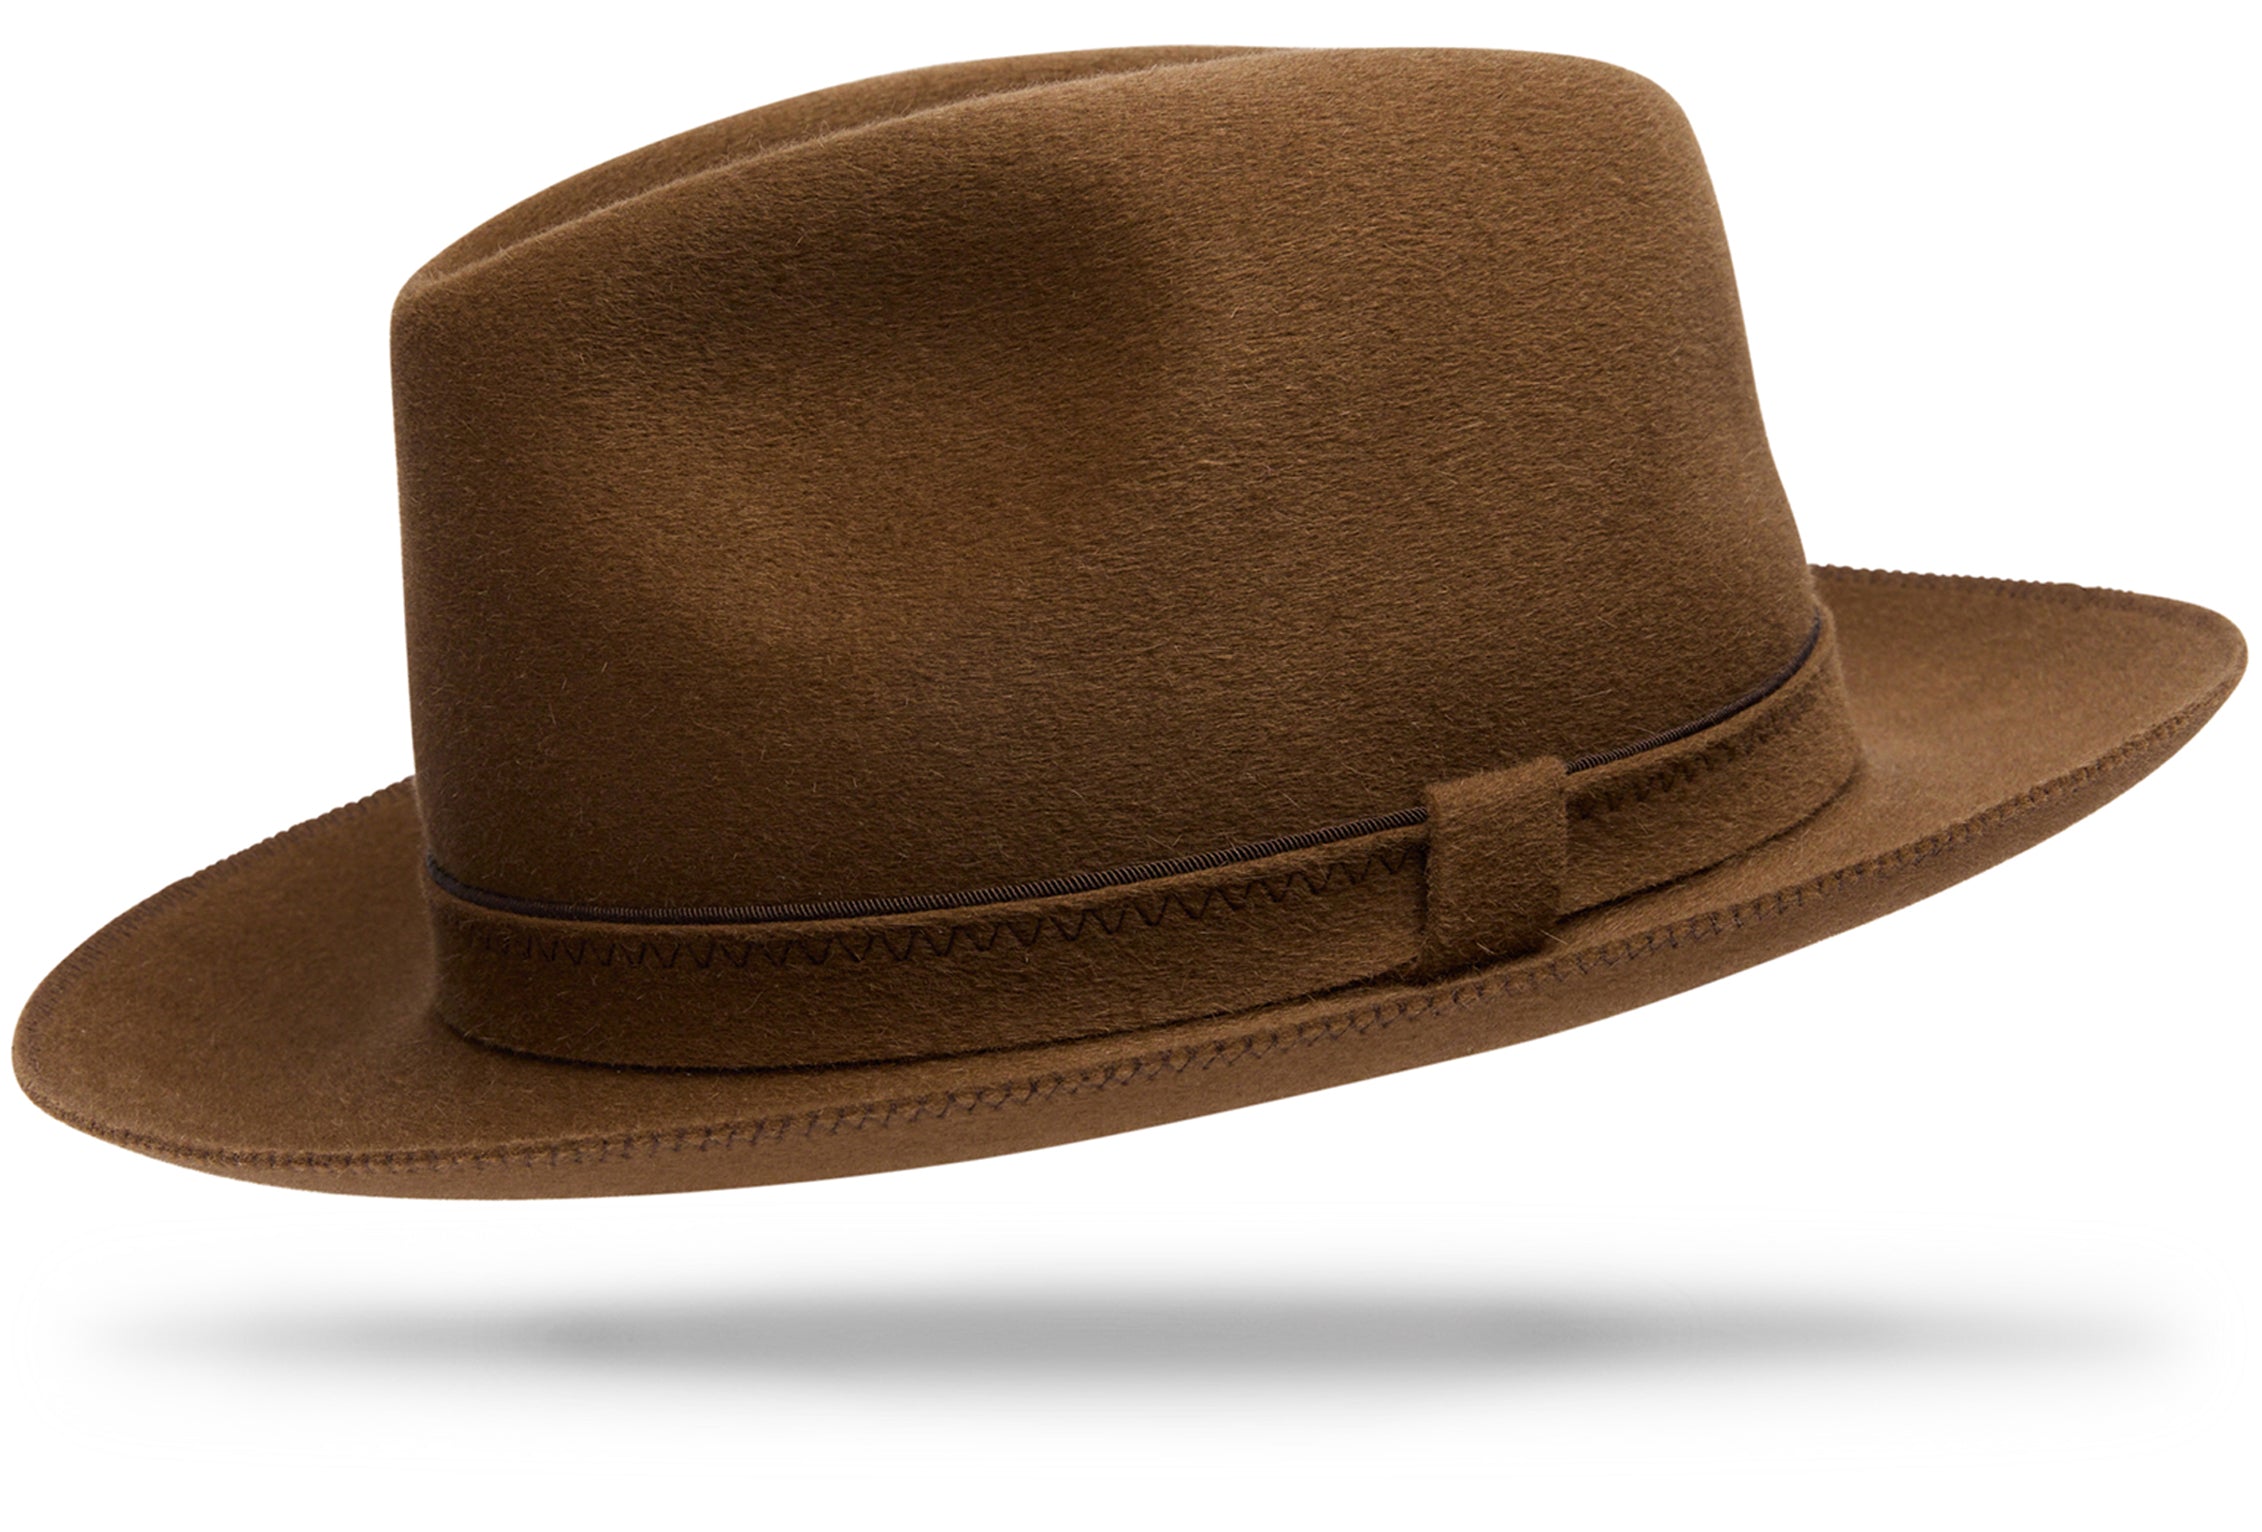 Design
A brown Italian cashmere hat with rich caramel undertones.Made of 100% lustrous cashmere, the Firenze fully embodies luxury chic.
Material
100% Italian cashmere
Specifications
- The felt-on-felt hatband with its contrast complimentary edging takes a detail-oriented to the next level while the 2 3/8” brim and moderate crown effortlessly exude quality. - Handmade in our atelier in NYC.